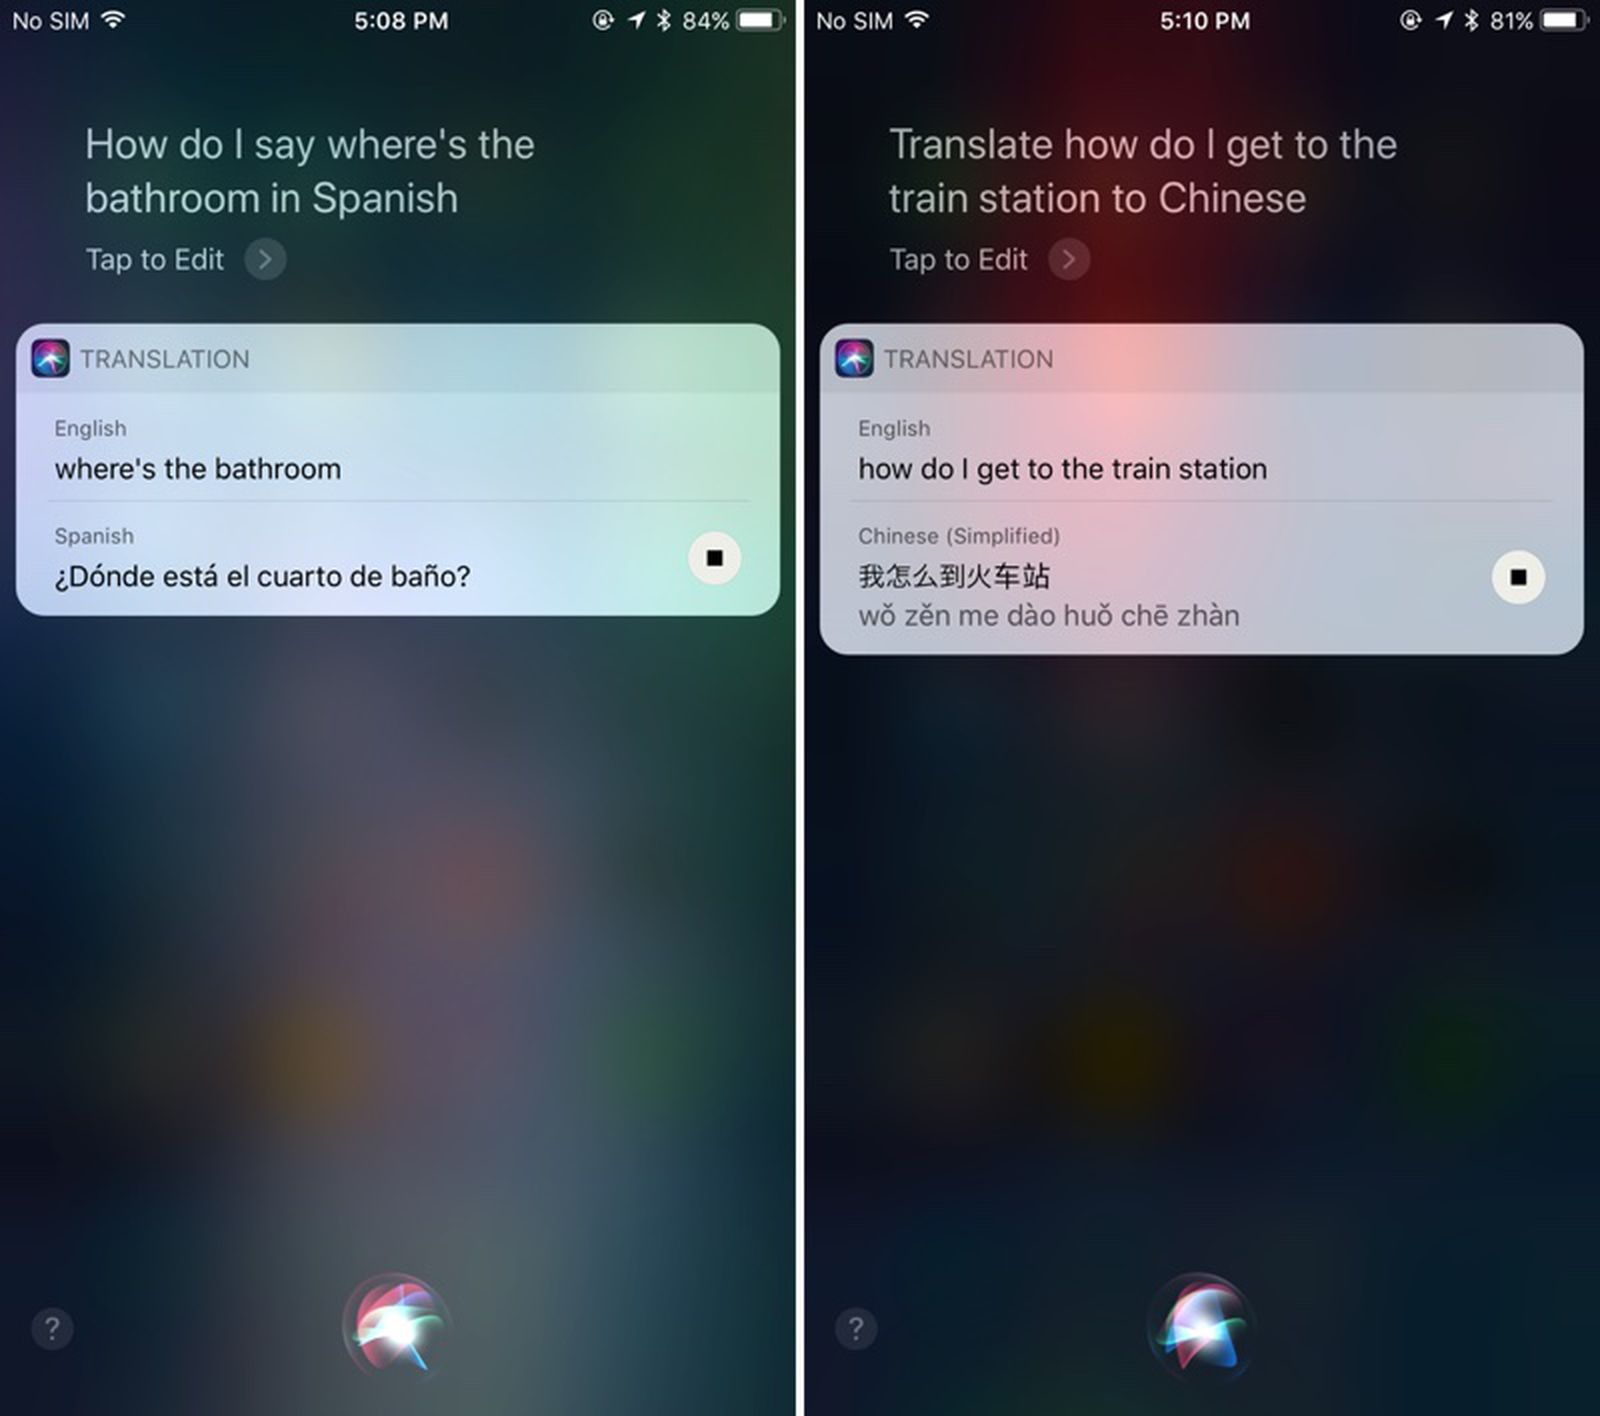 How To Use Siris New Translation Feature In Ios 11 Macrumors